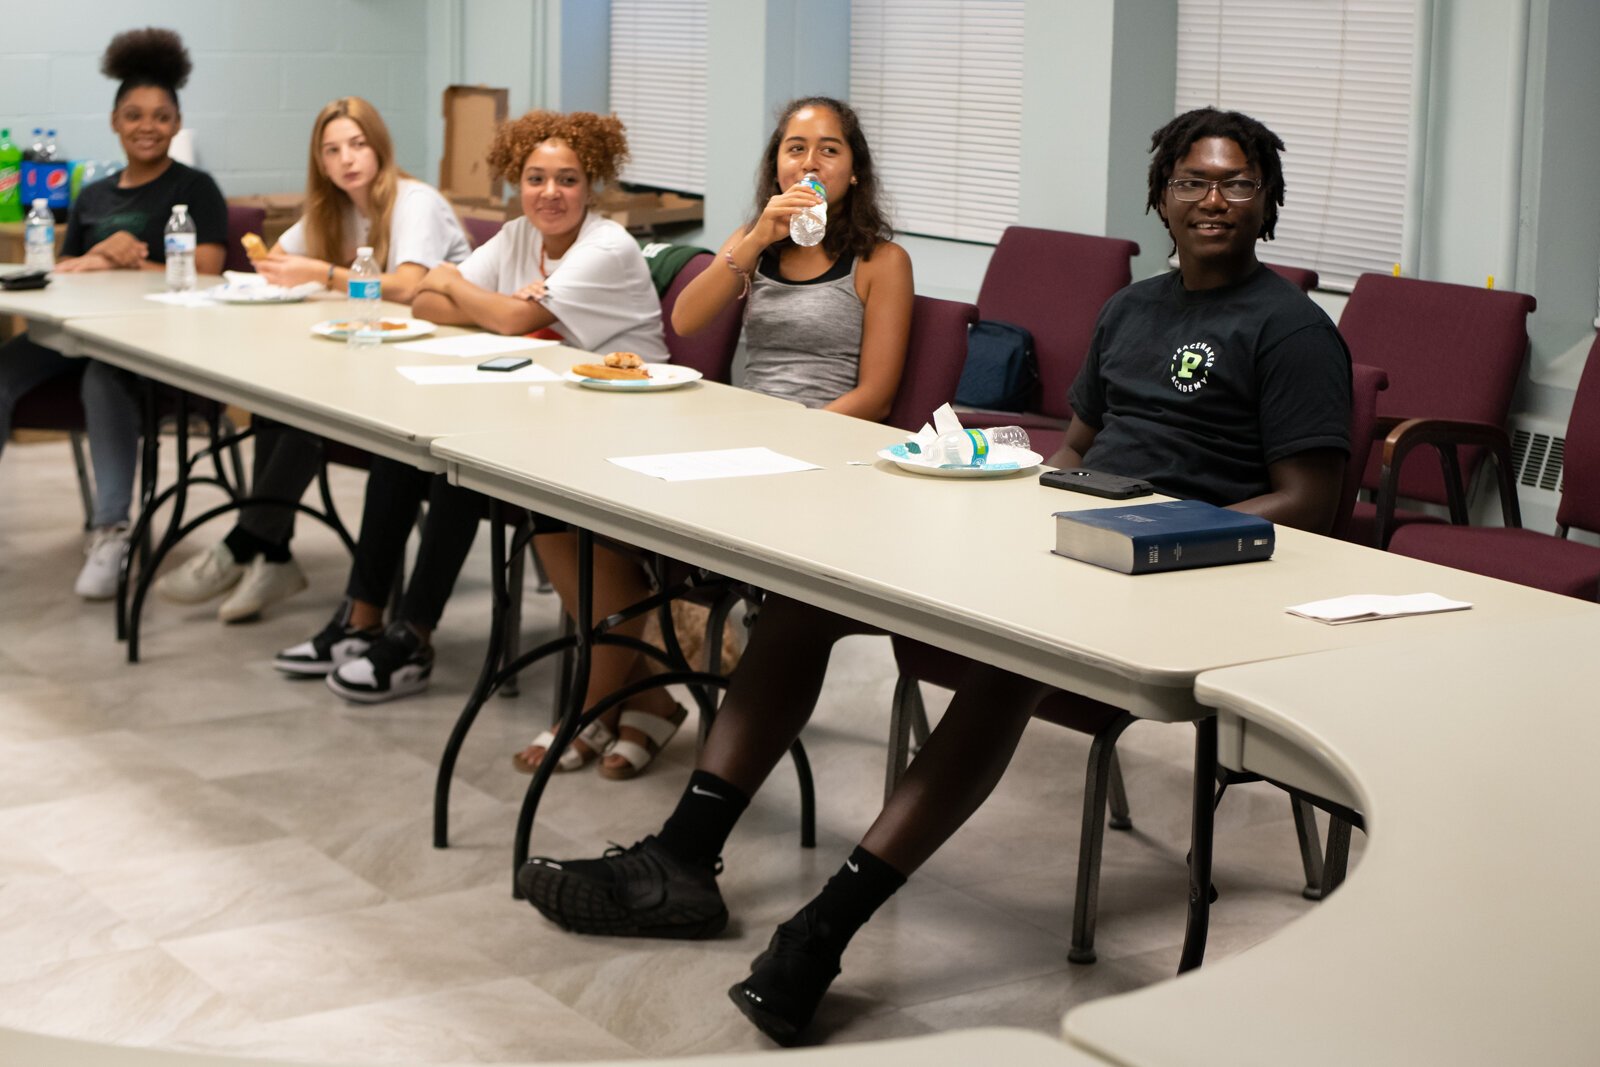 Dazhon Ware talks with members who are part of the Peacemaker Academy via a Zoom call during a meeting led by director Angelo Mante at First Wayne St. United Methodist Church.